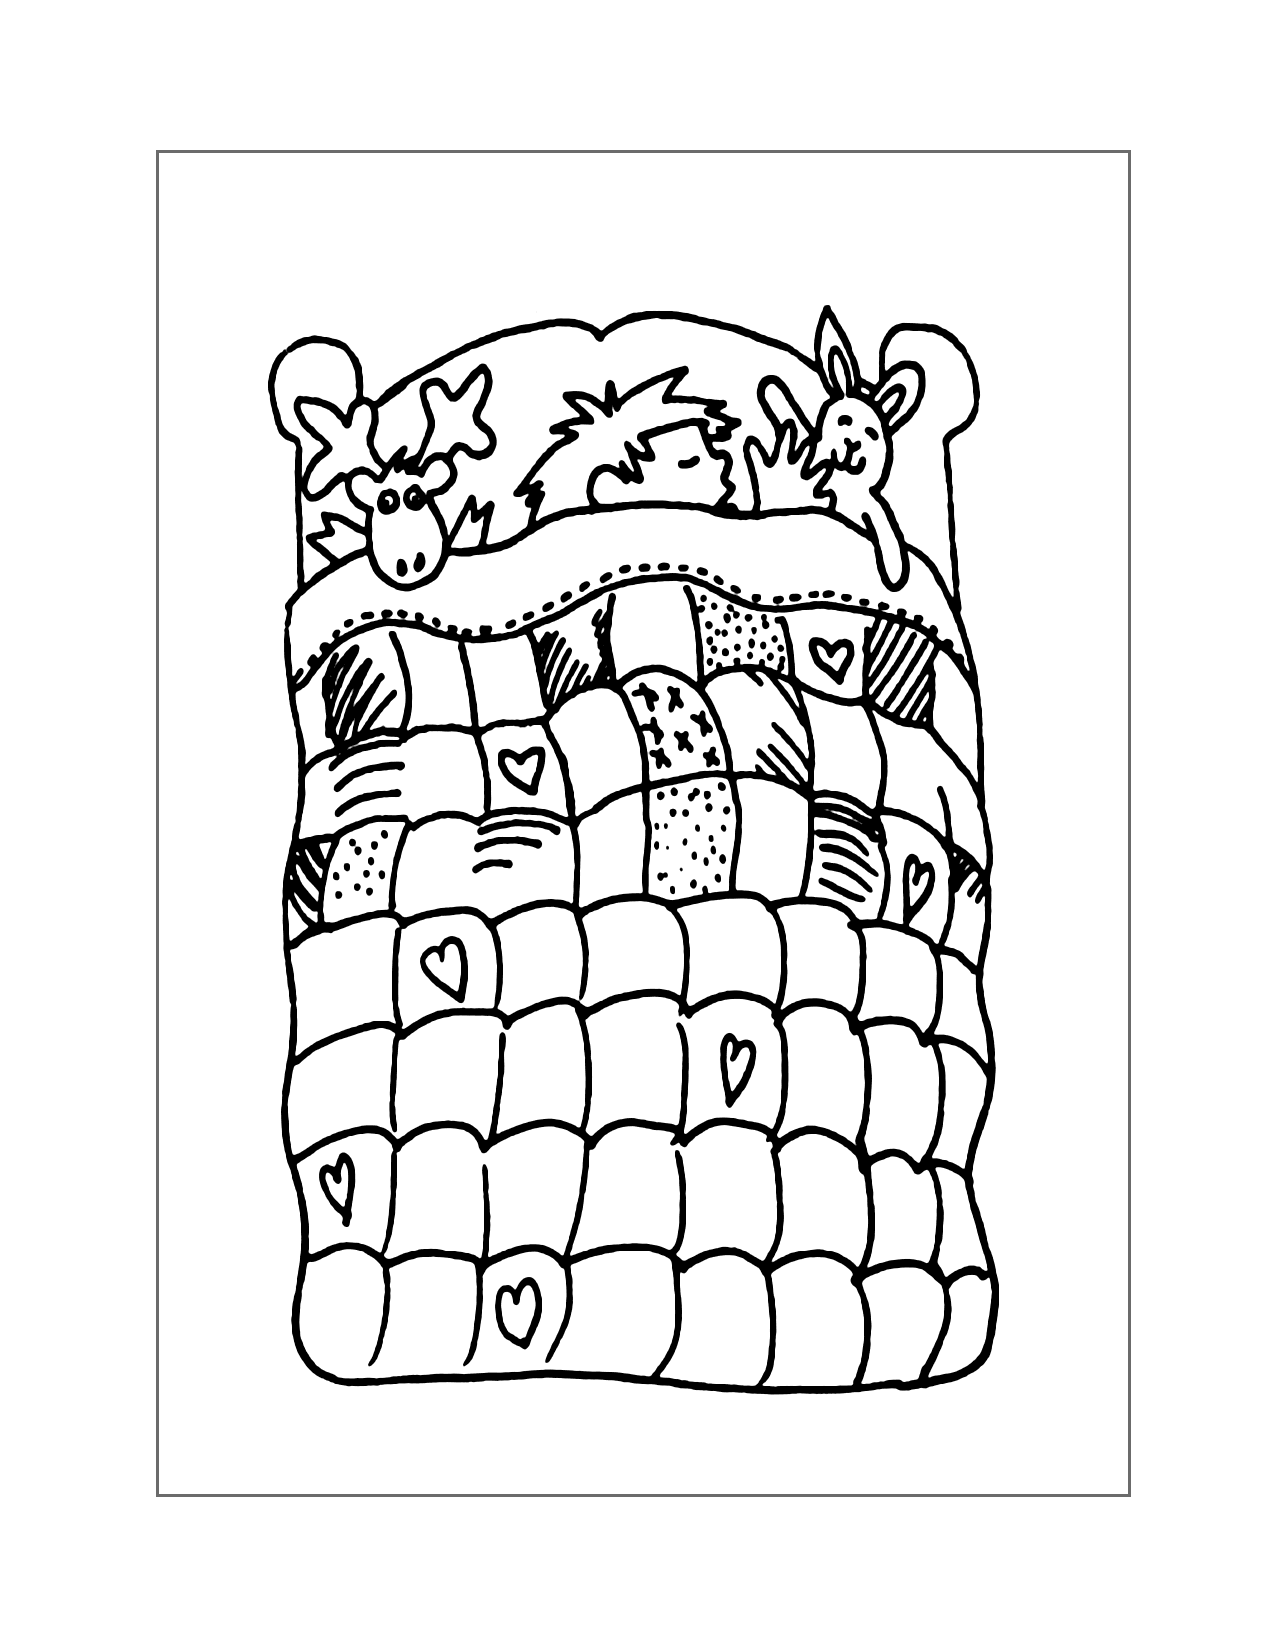 Boy Sleeping With Quilt On A Bed Coloring Page